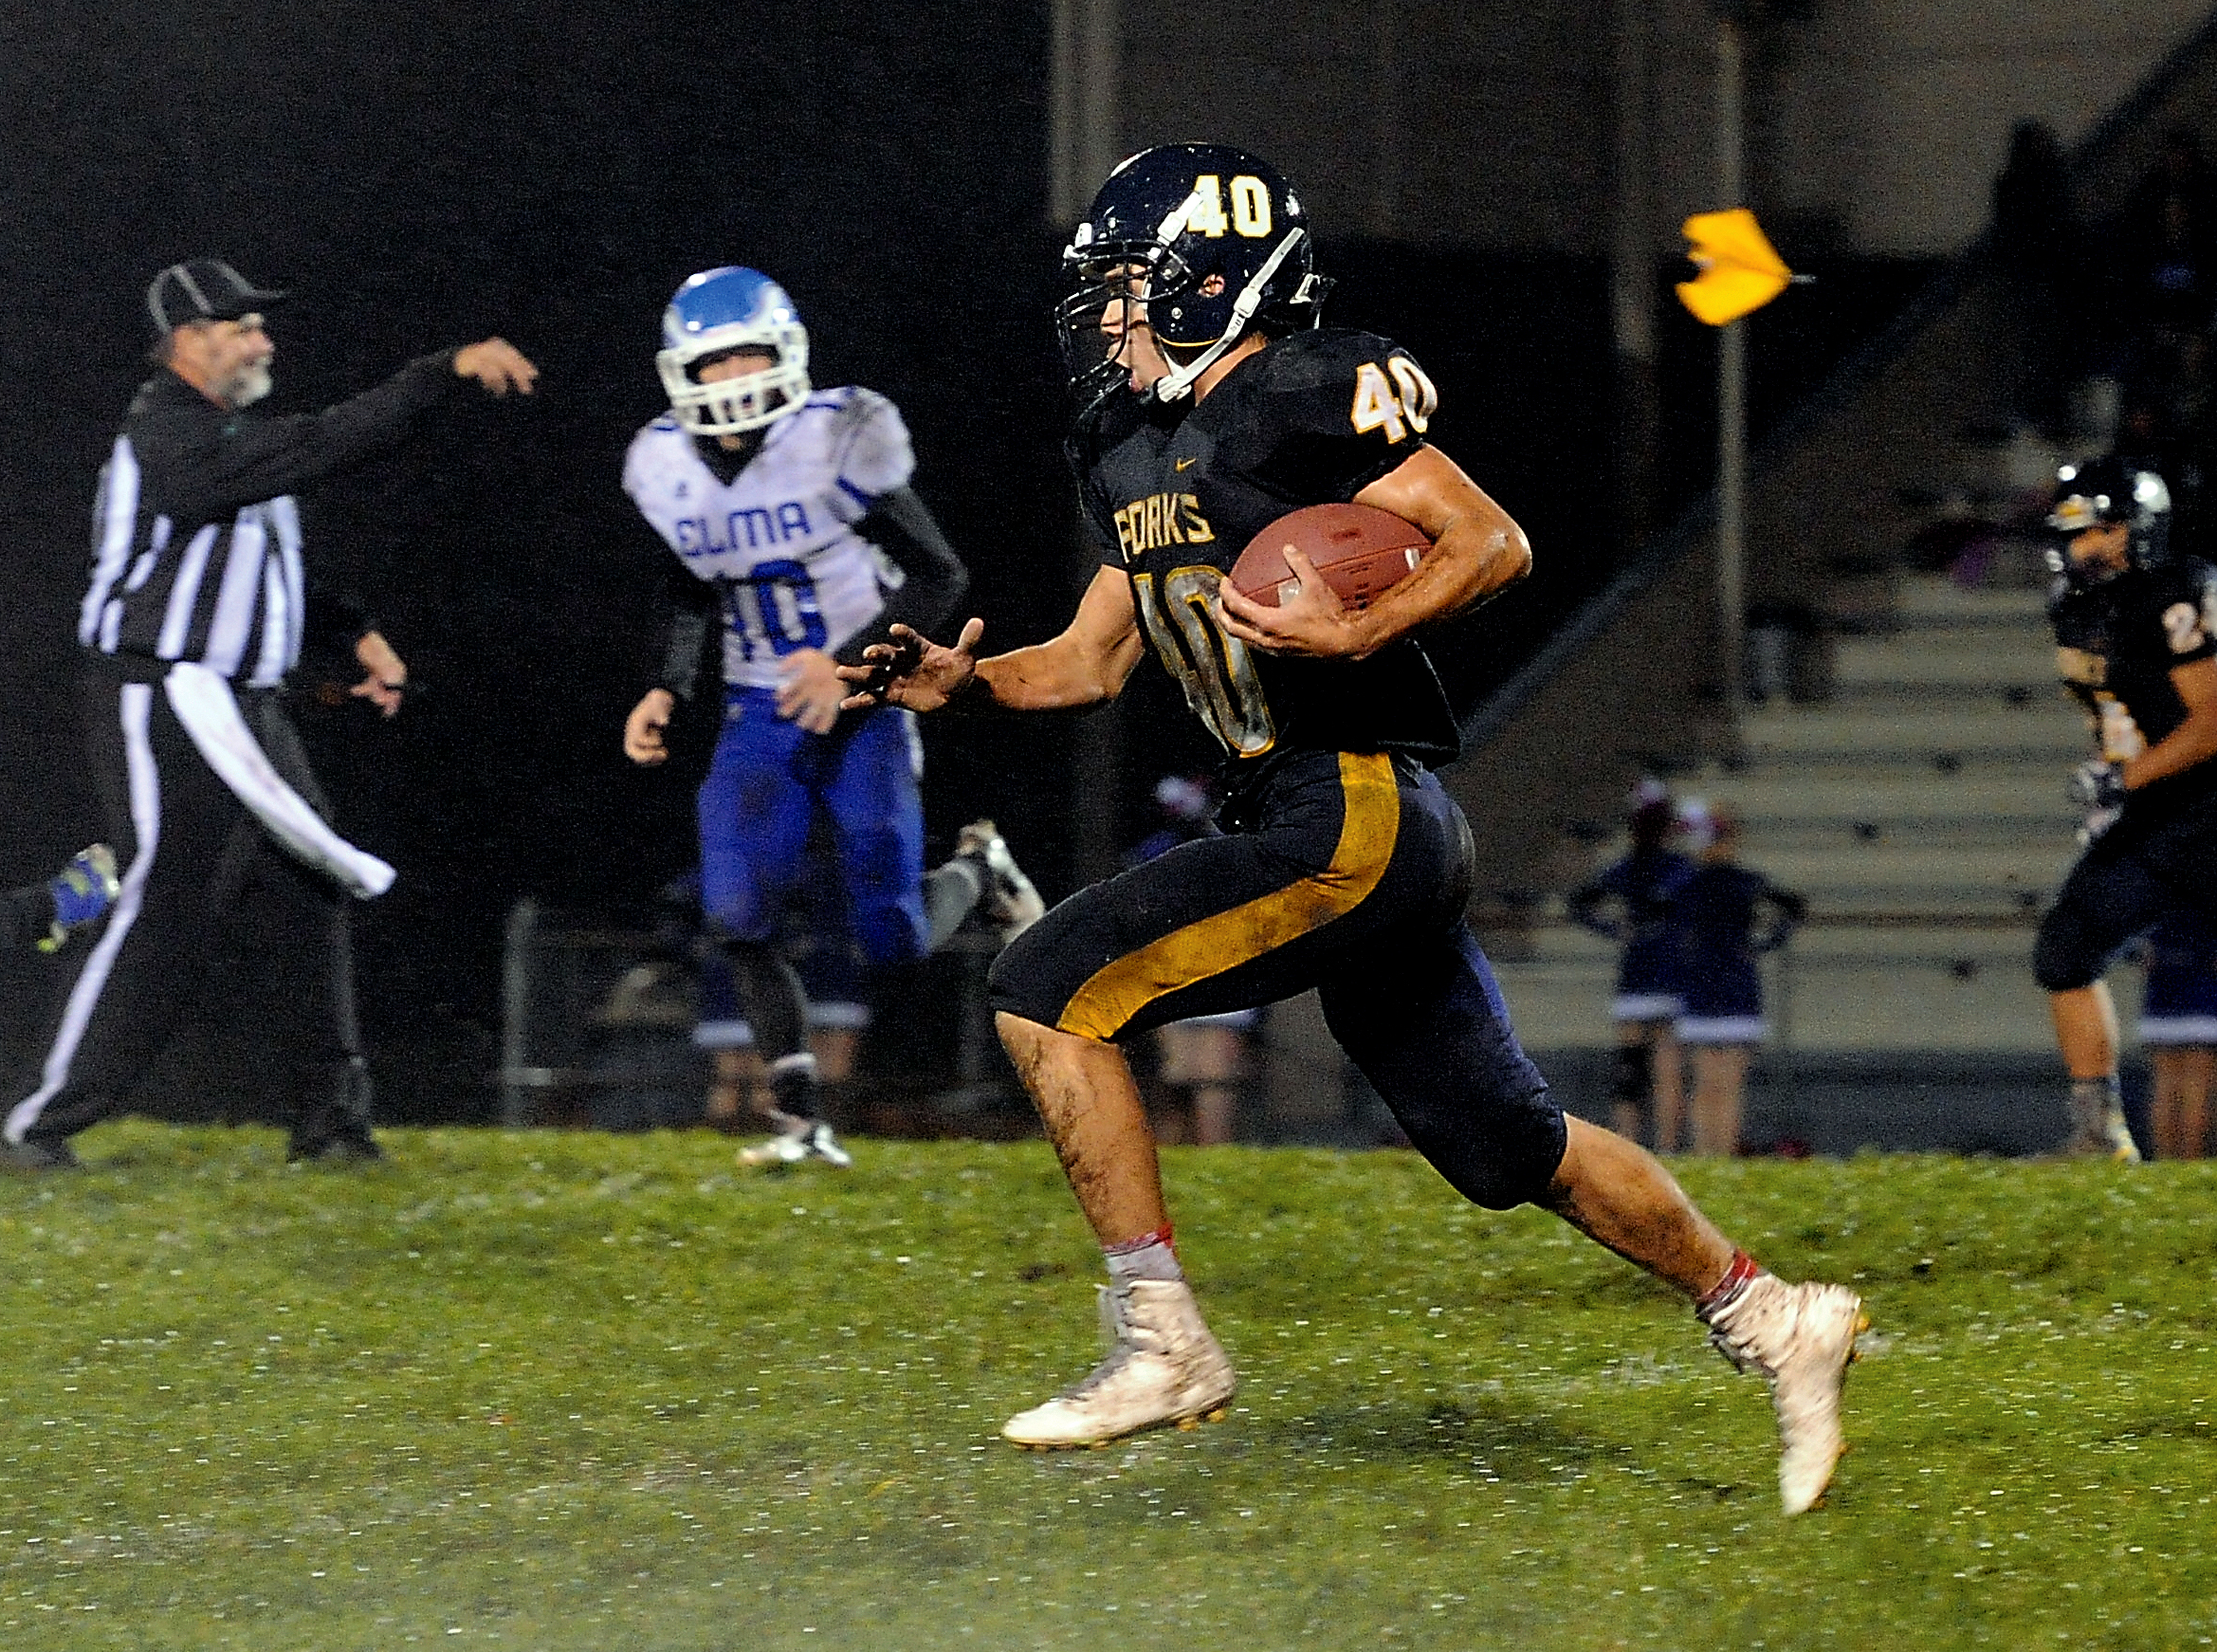 Forks running back Garrison Schumack (40) runs for a big gain that was called back due to a holding penalty as indicated by the flag in the background. Elma's Bryson Crisp (10) pursues Schumack from across the field. Lonnie Archibald/for Peninsula Daily News